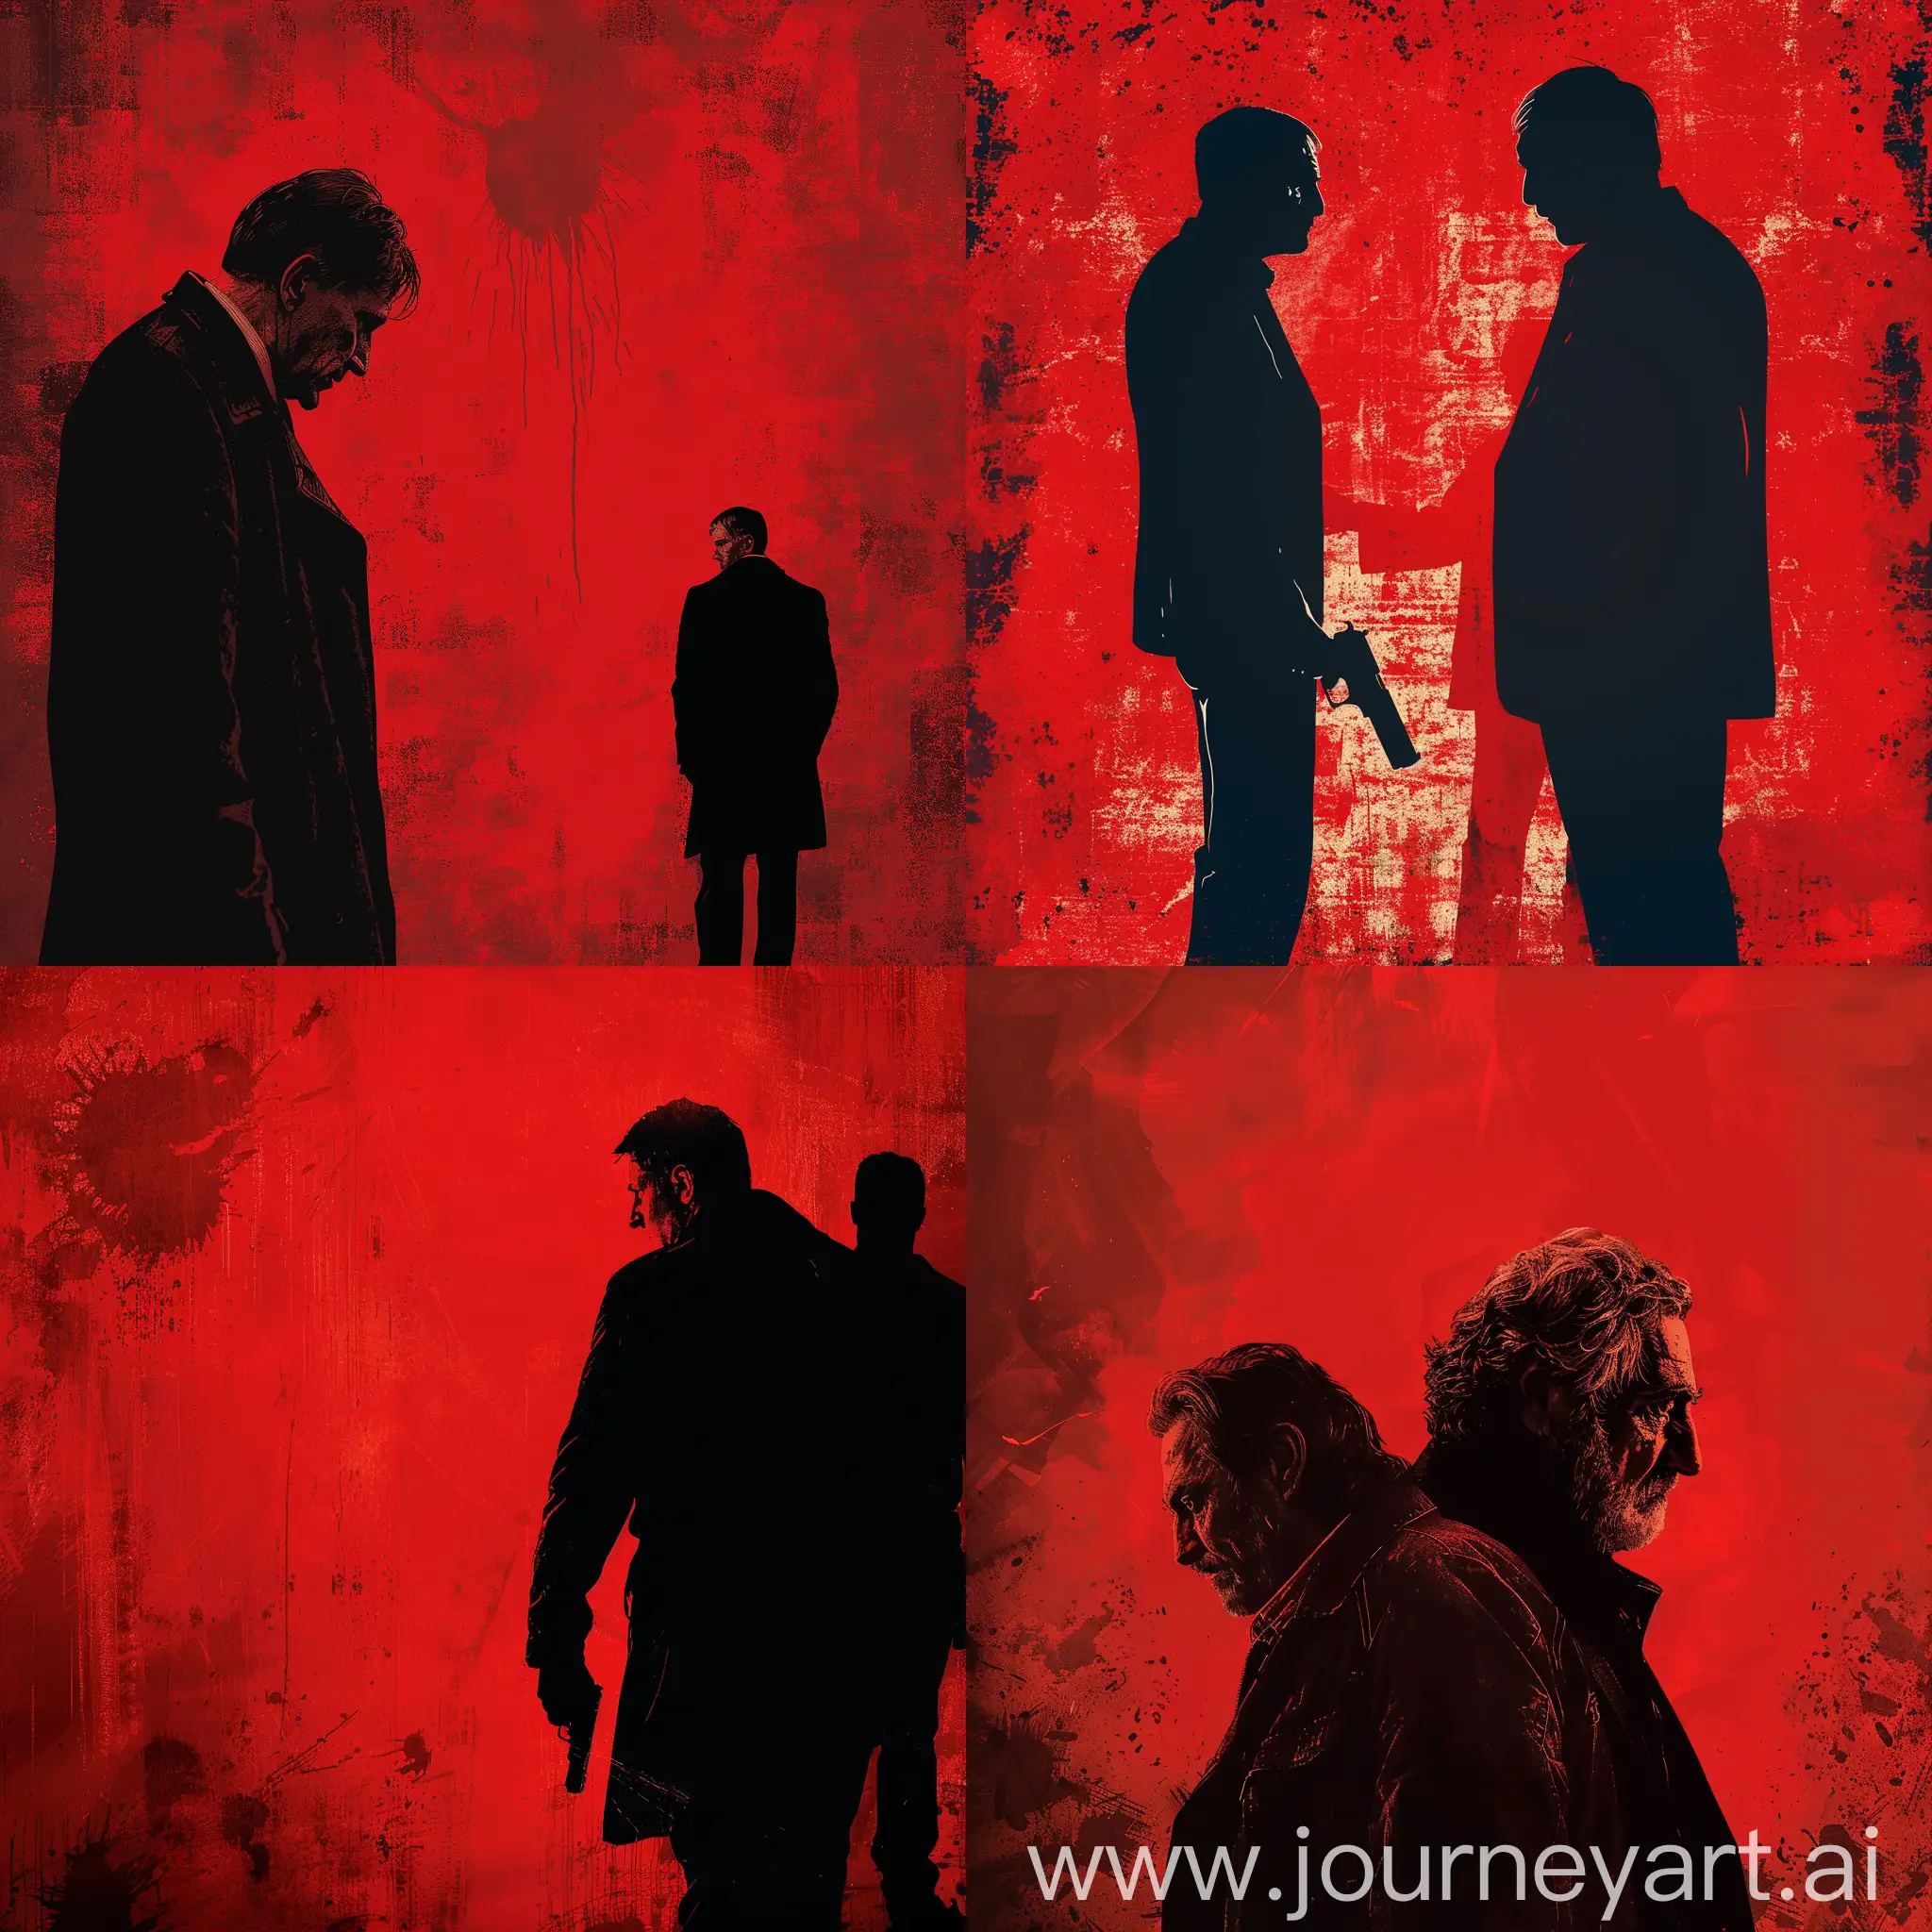 create a movie poster withou text, about a story happen between a 40 years old and his apprentise who want to commit a crime,  drama genre, red background WITH SILHOUETTE, artistic